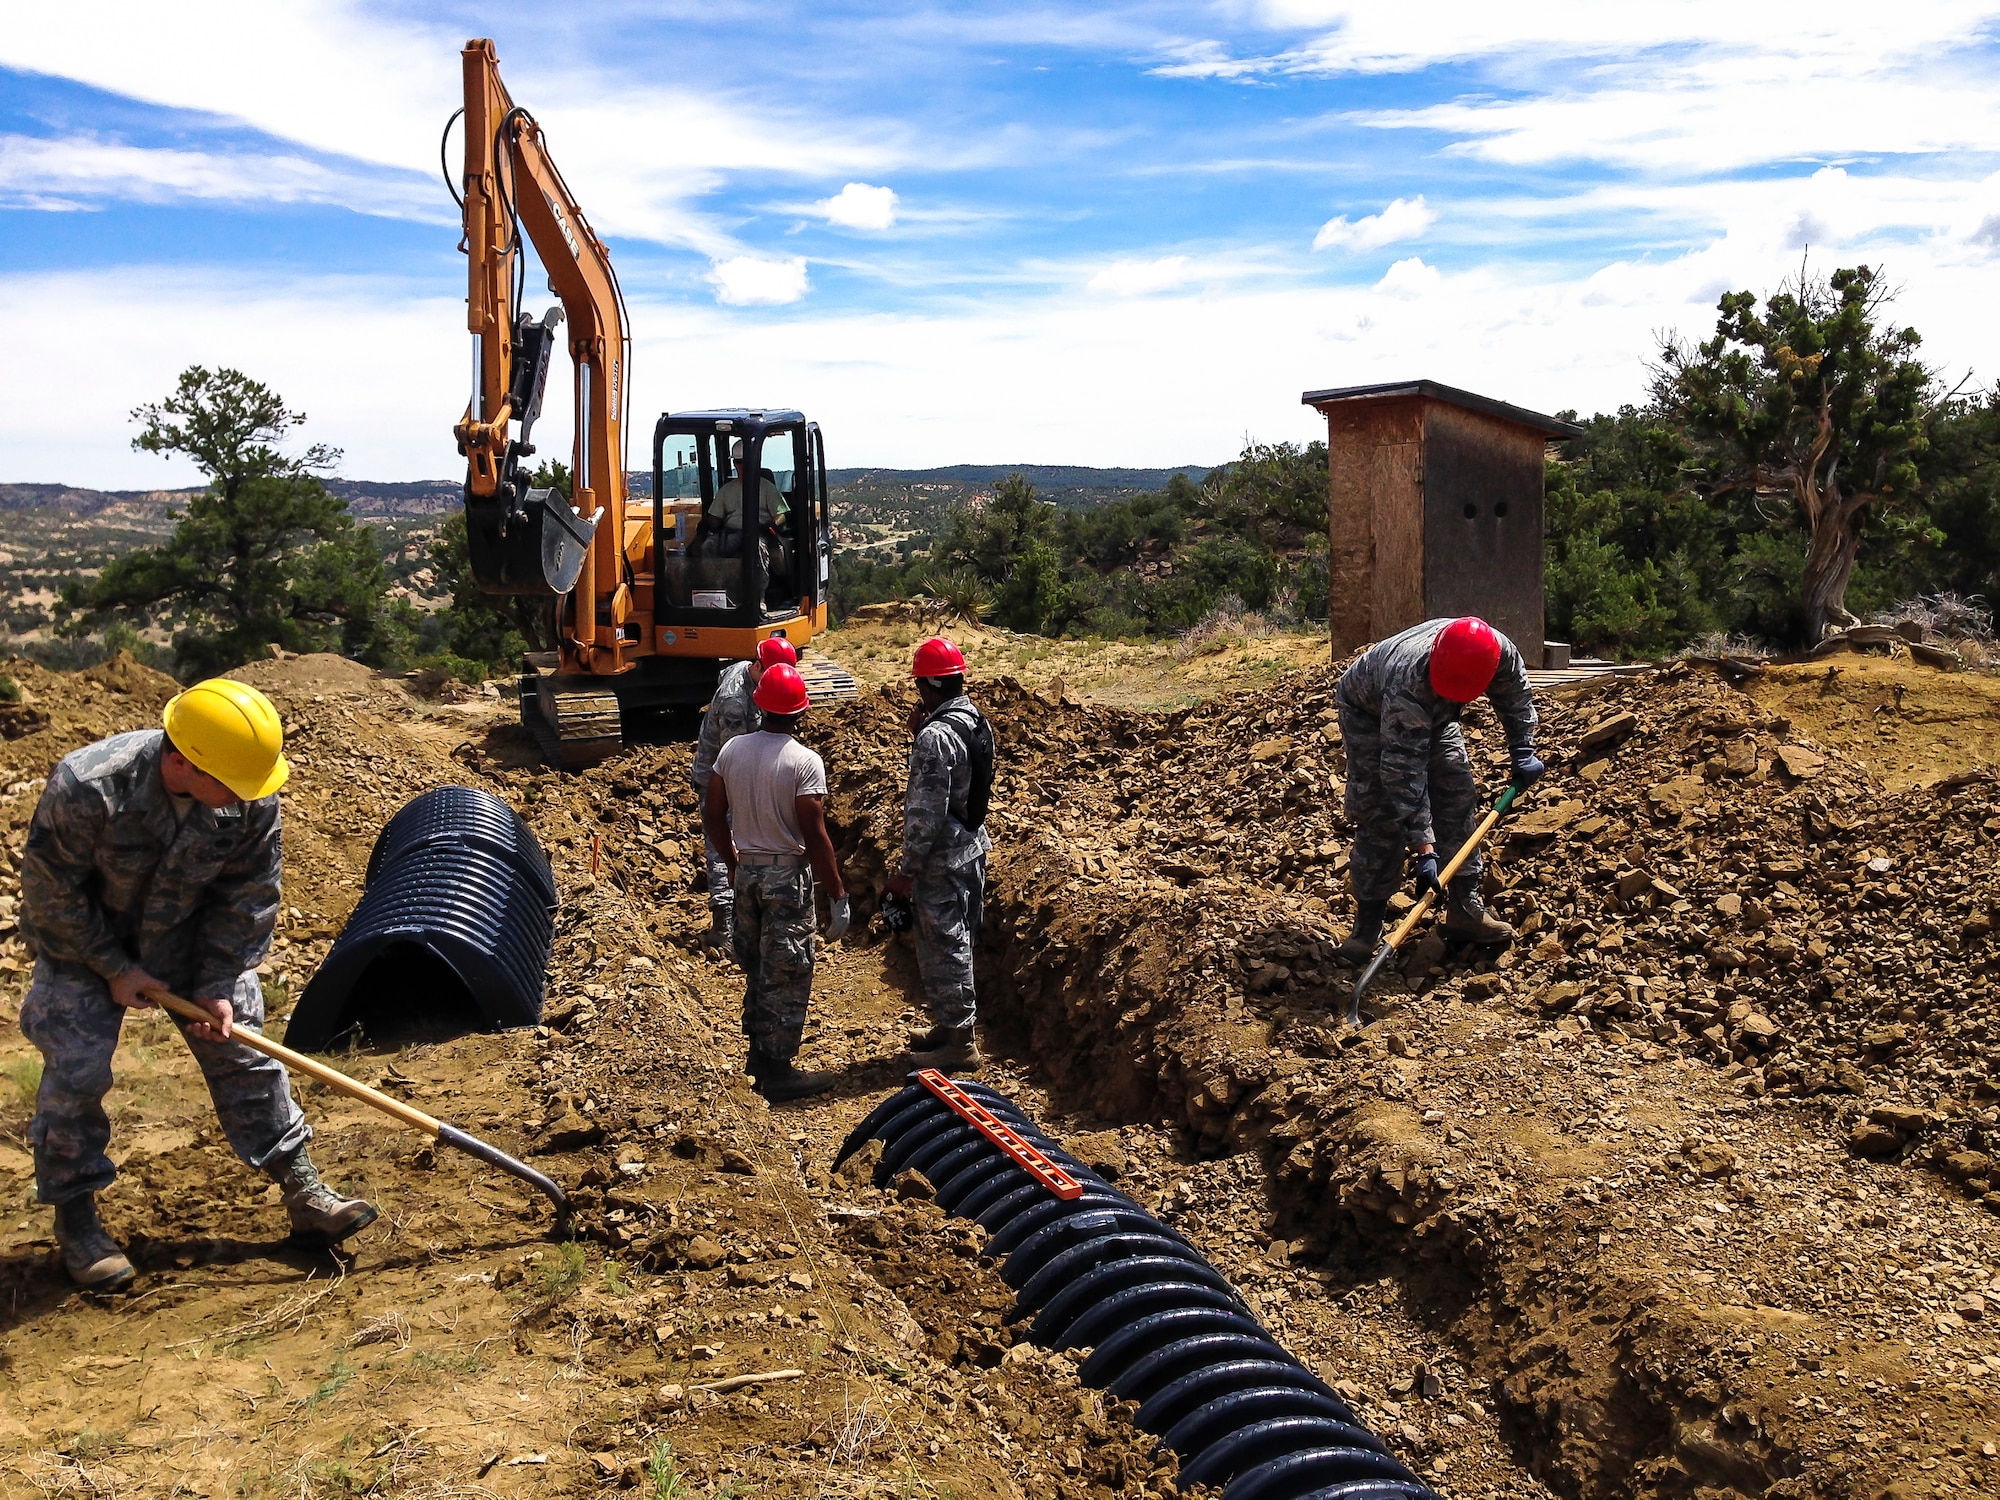 Six members of the 507th Civil Engineer Squadron perform earthwork with shovels and a backhoe at a home site on the Navajo Nation reservation in Gallup, N.M. in July.  The team partnered with a local charity and constructed homes for impoverished Indians as part of Innovative Readiness Training. (U.S. Air Force photo/1st Lt. Christopher Yates)